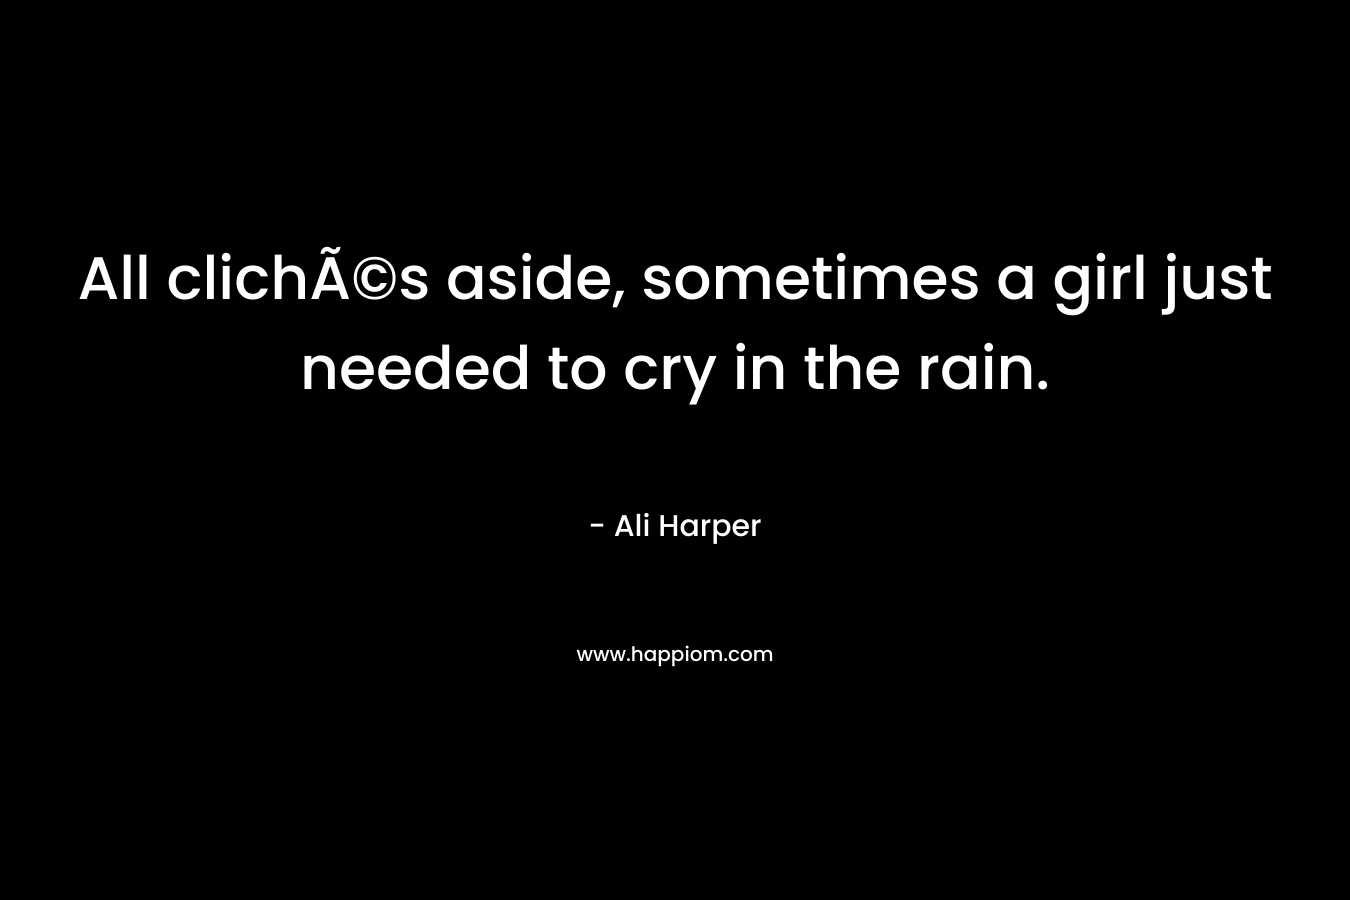 All clichÃ©s aside, sometimes a girl just needed to cry in the rain.